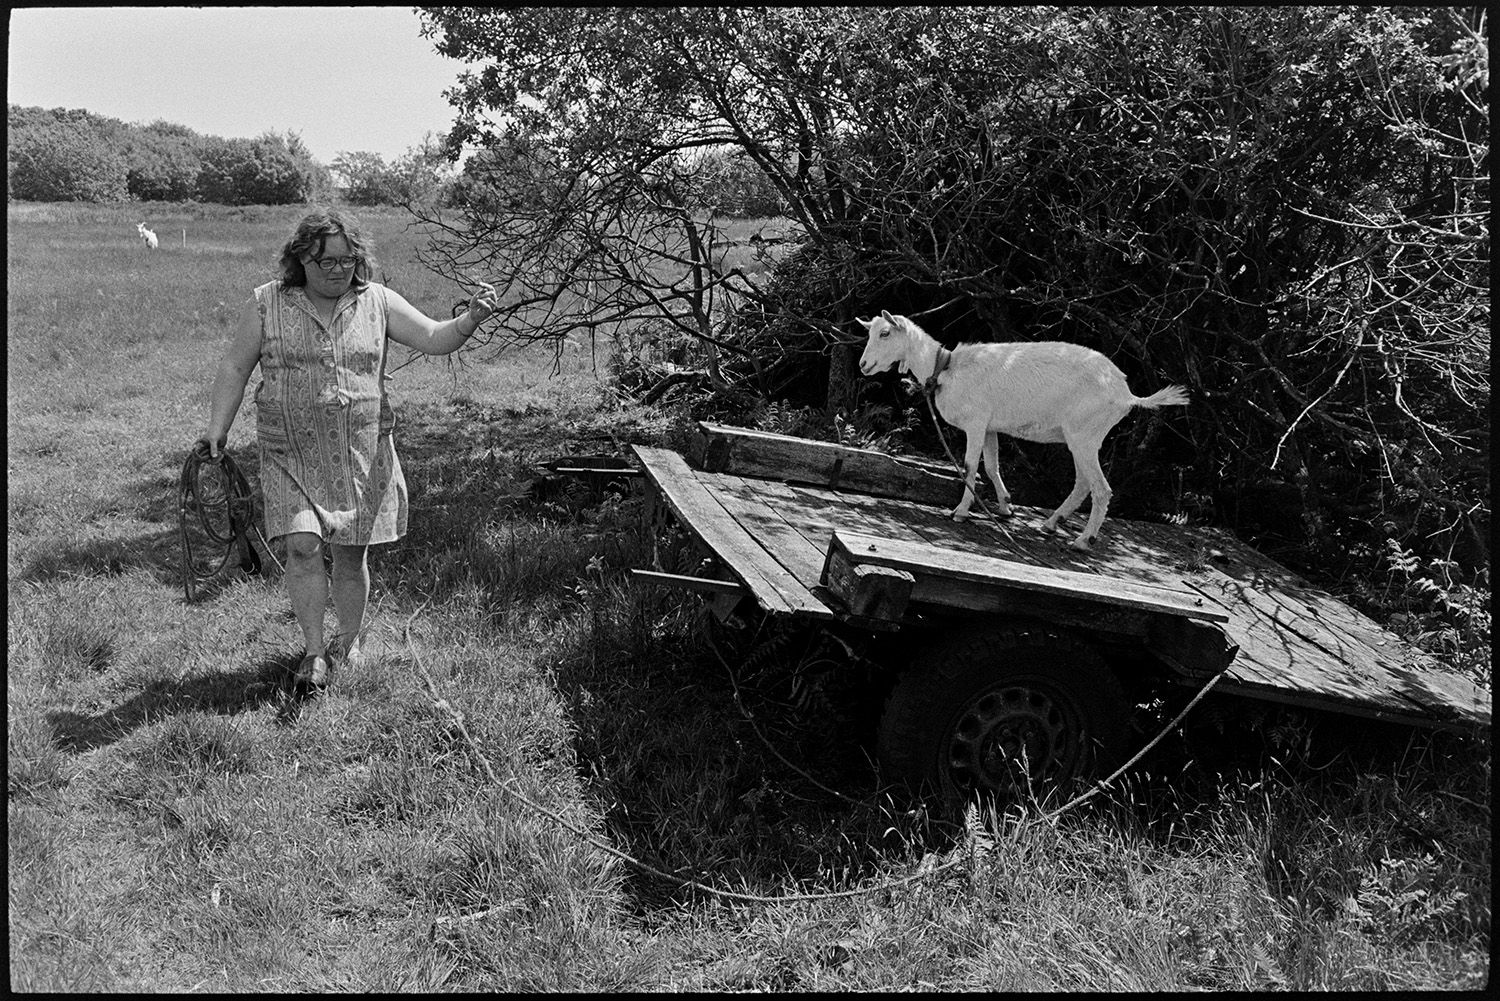 Woman farmer tethering goats. 
[Olive Bennett tethering  goat in a field at Cuppers Piece, Beaford. The goat is stood on a wooden trailer by a hedge in the field.]